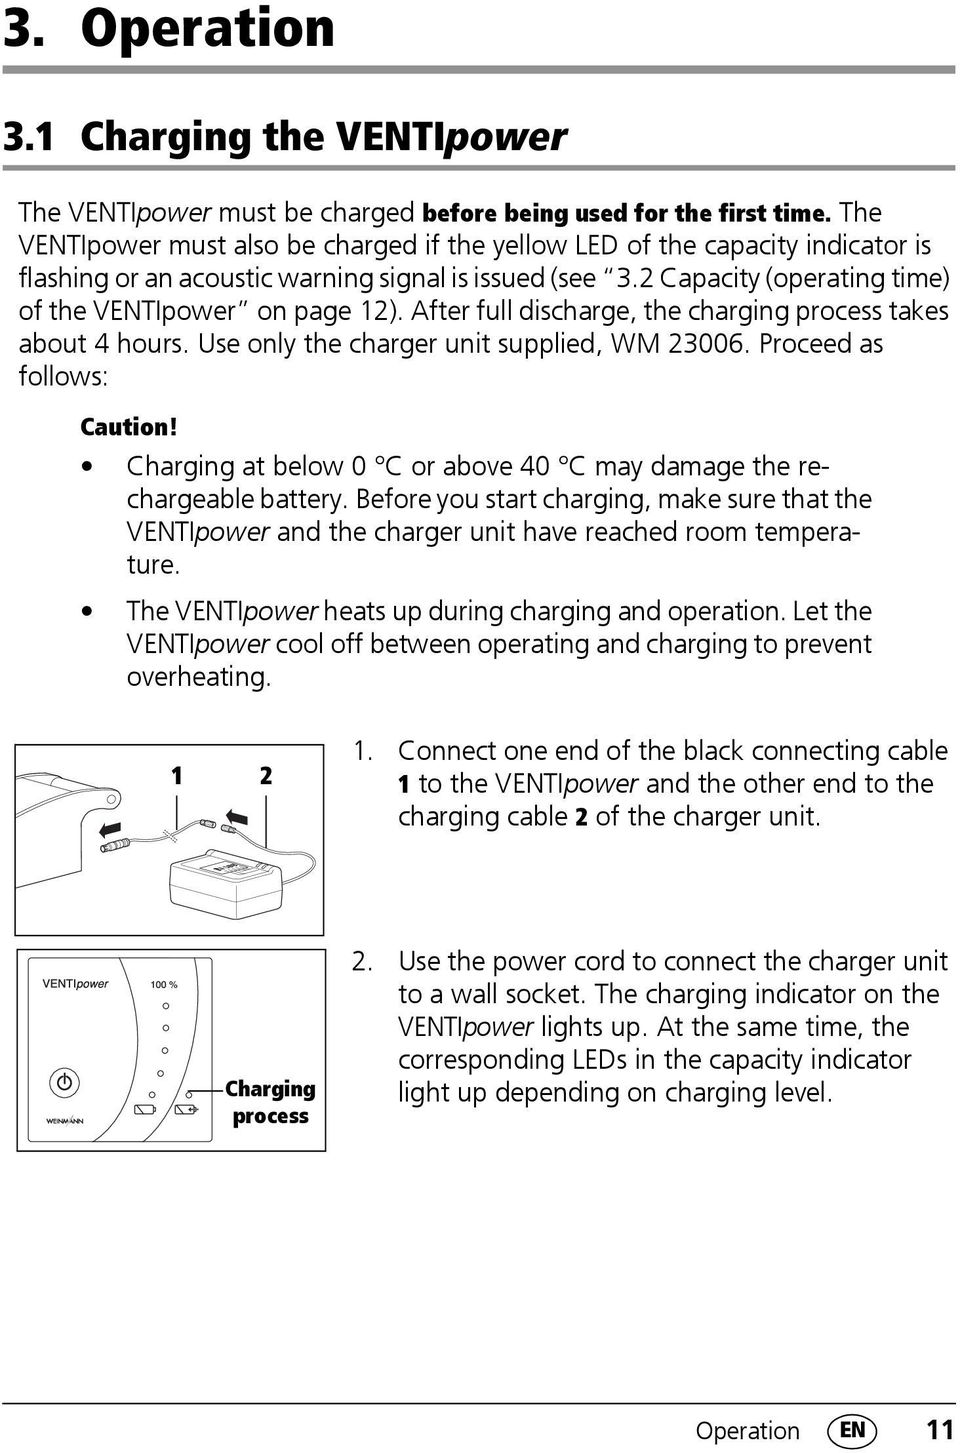 After full discharge, the charging process takes about 4 hours. Use only the charger unit supplied, WM 23006. Proceed as follows: Caution!